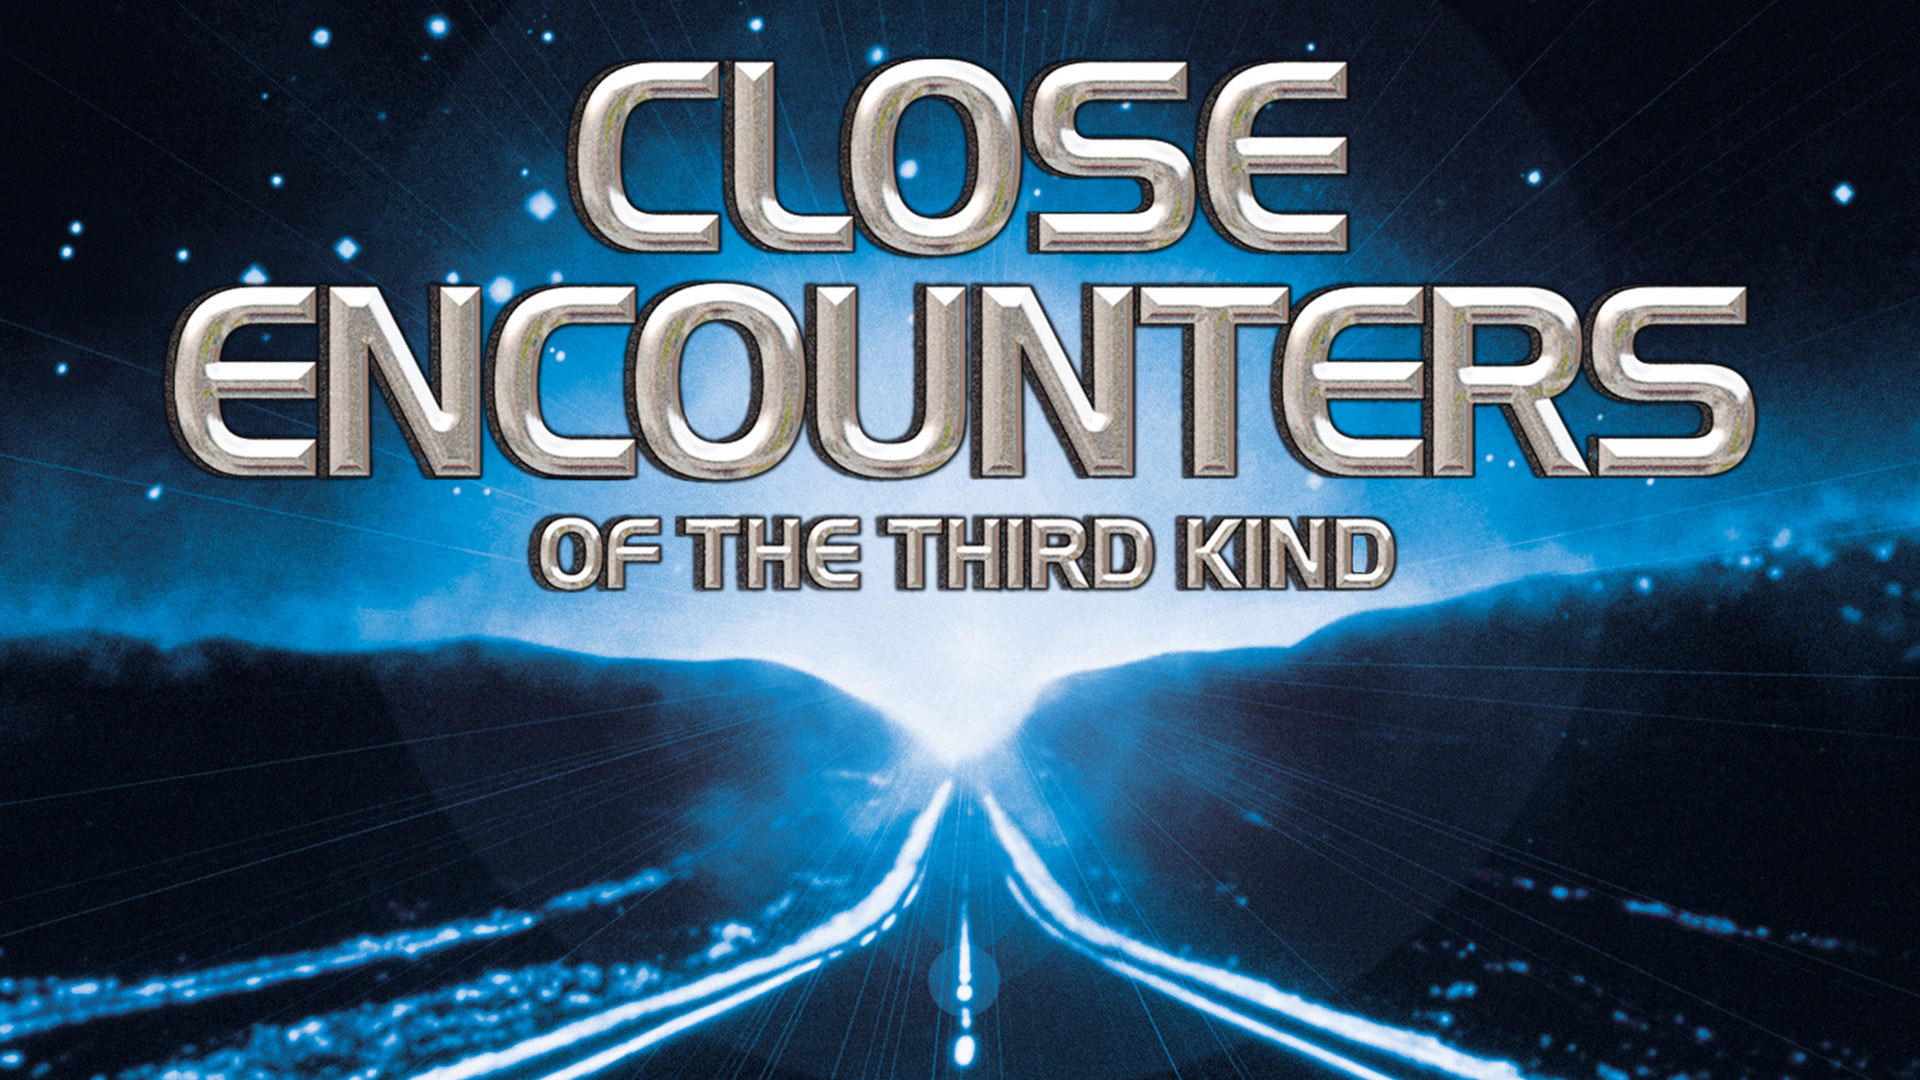 Close Encounters of the Third Kind: Communicating with the Cosmos